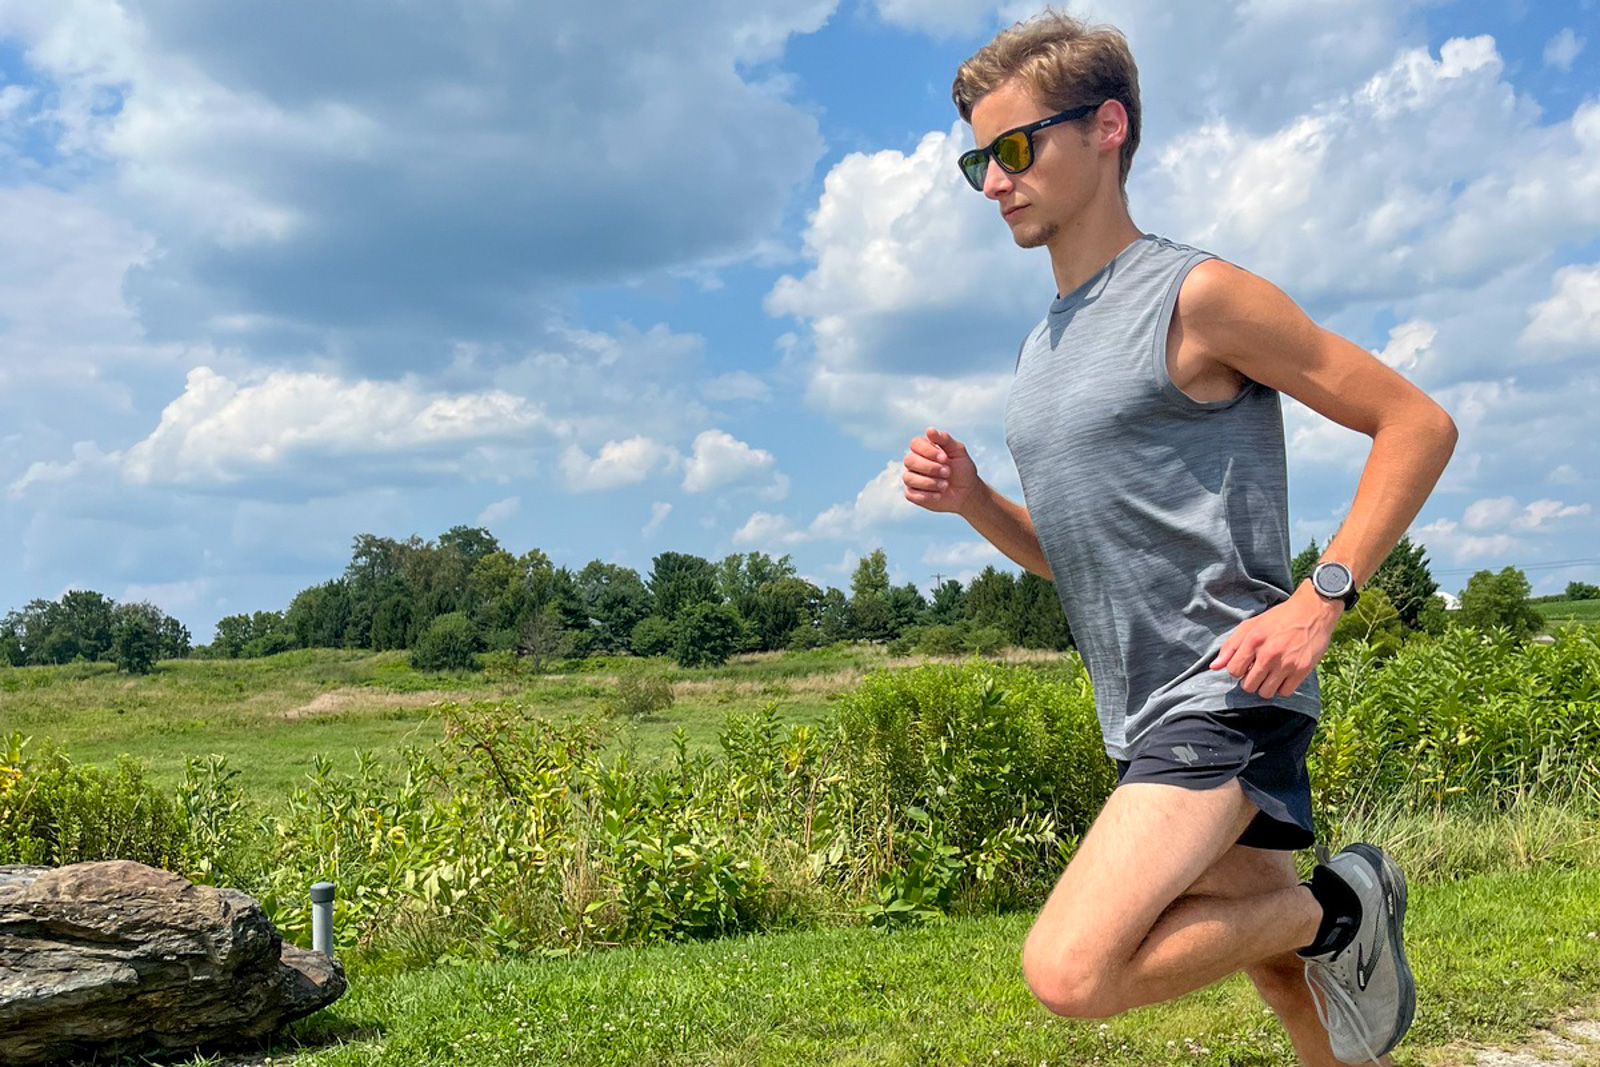 Rabbit Running Shorts Review: The Pacer and The Pack Rat - Believe